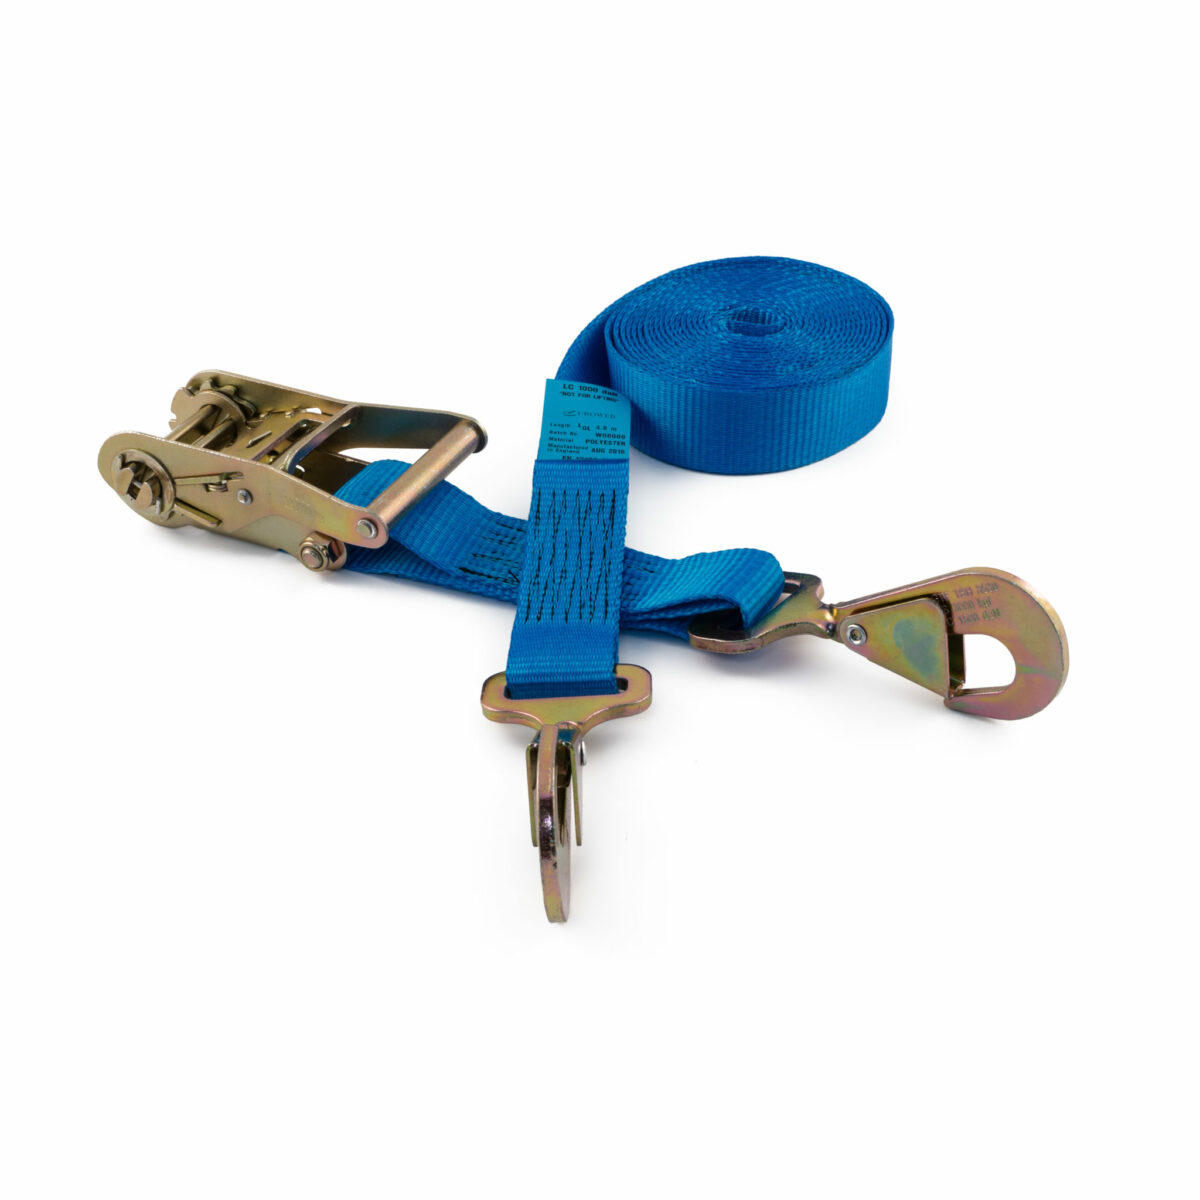 https://gtf.co.uk/wp-content/uploads/RLL35TSH-35mm-Ratchet-Straps-with-Twisted-Snap-Hooks-2-Part-System.jpg